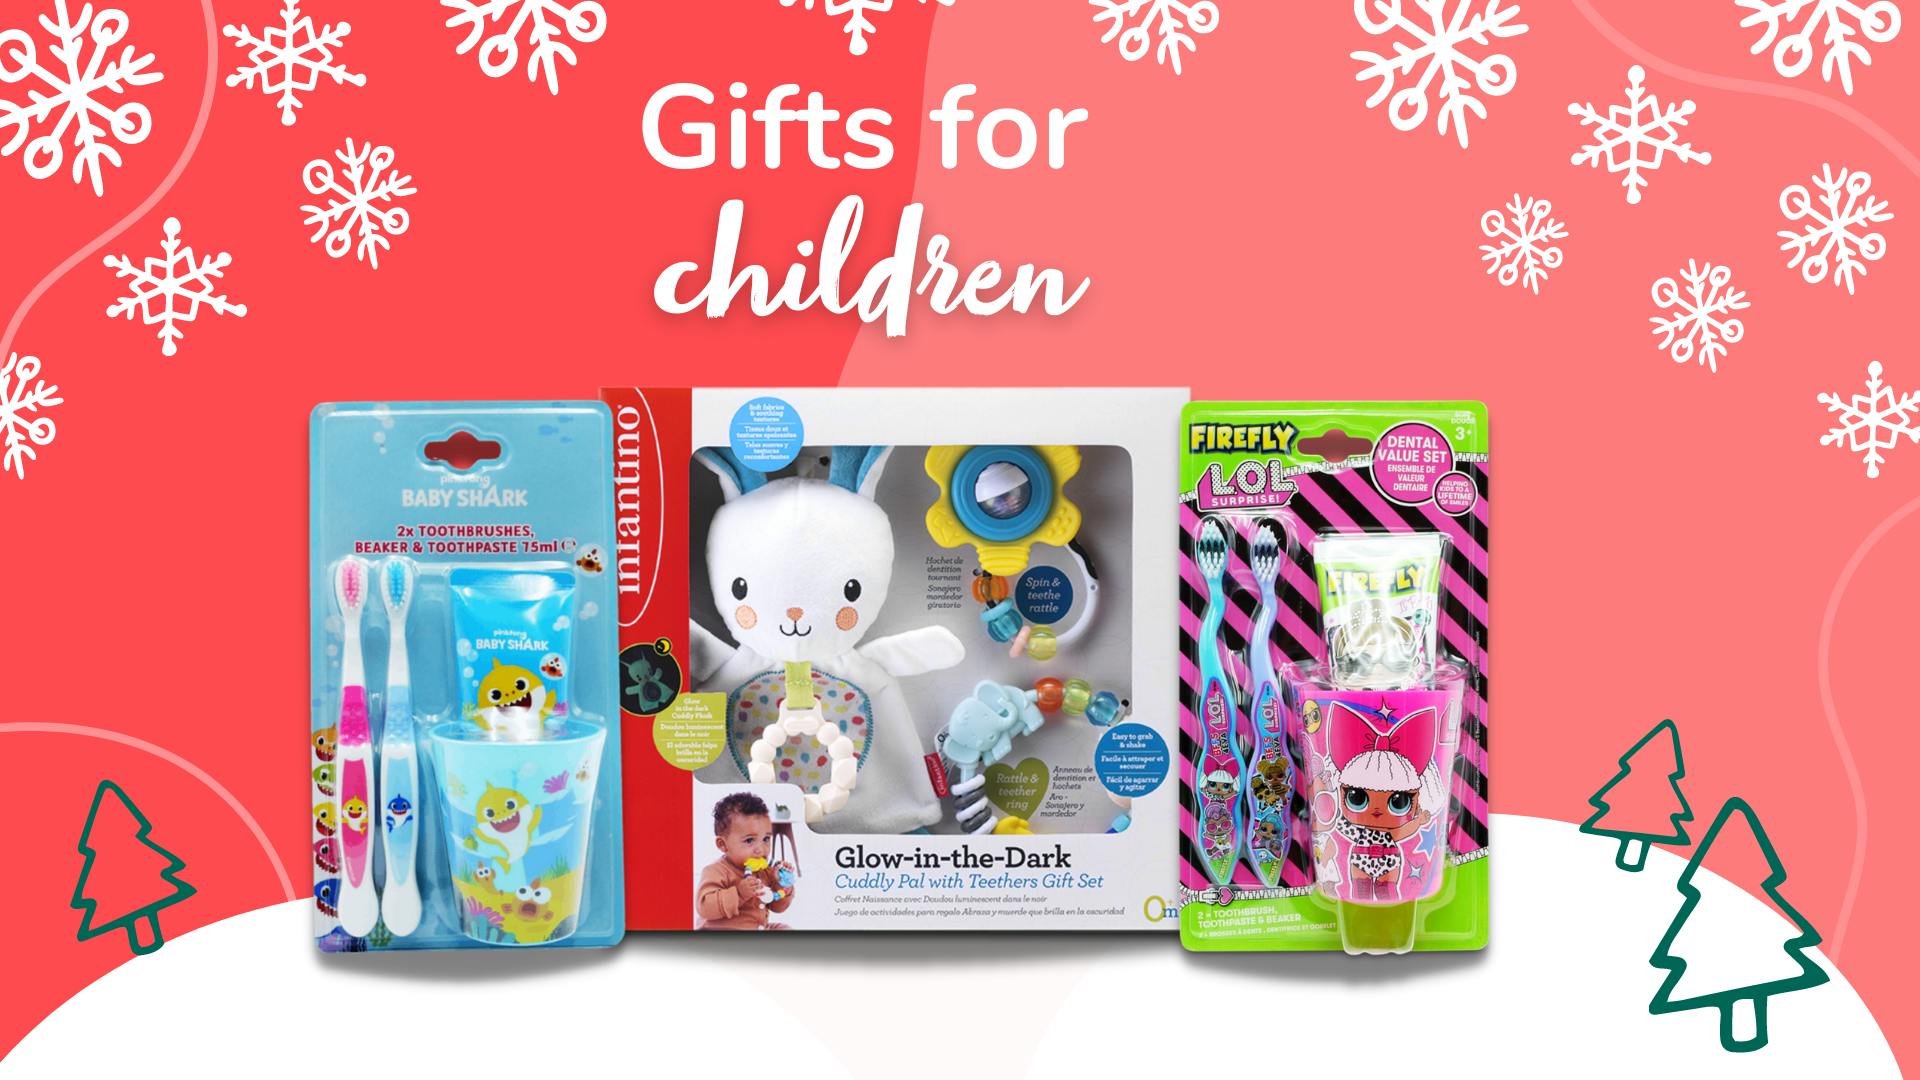 Christmas & holiday gift sets and gifts for children